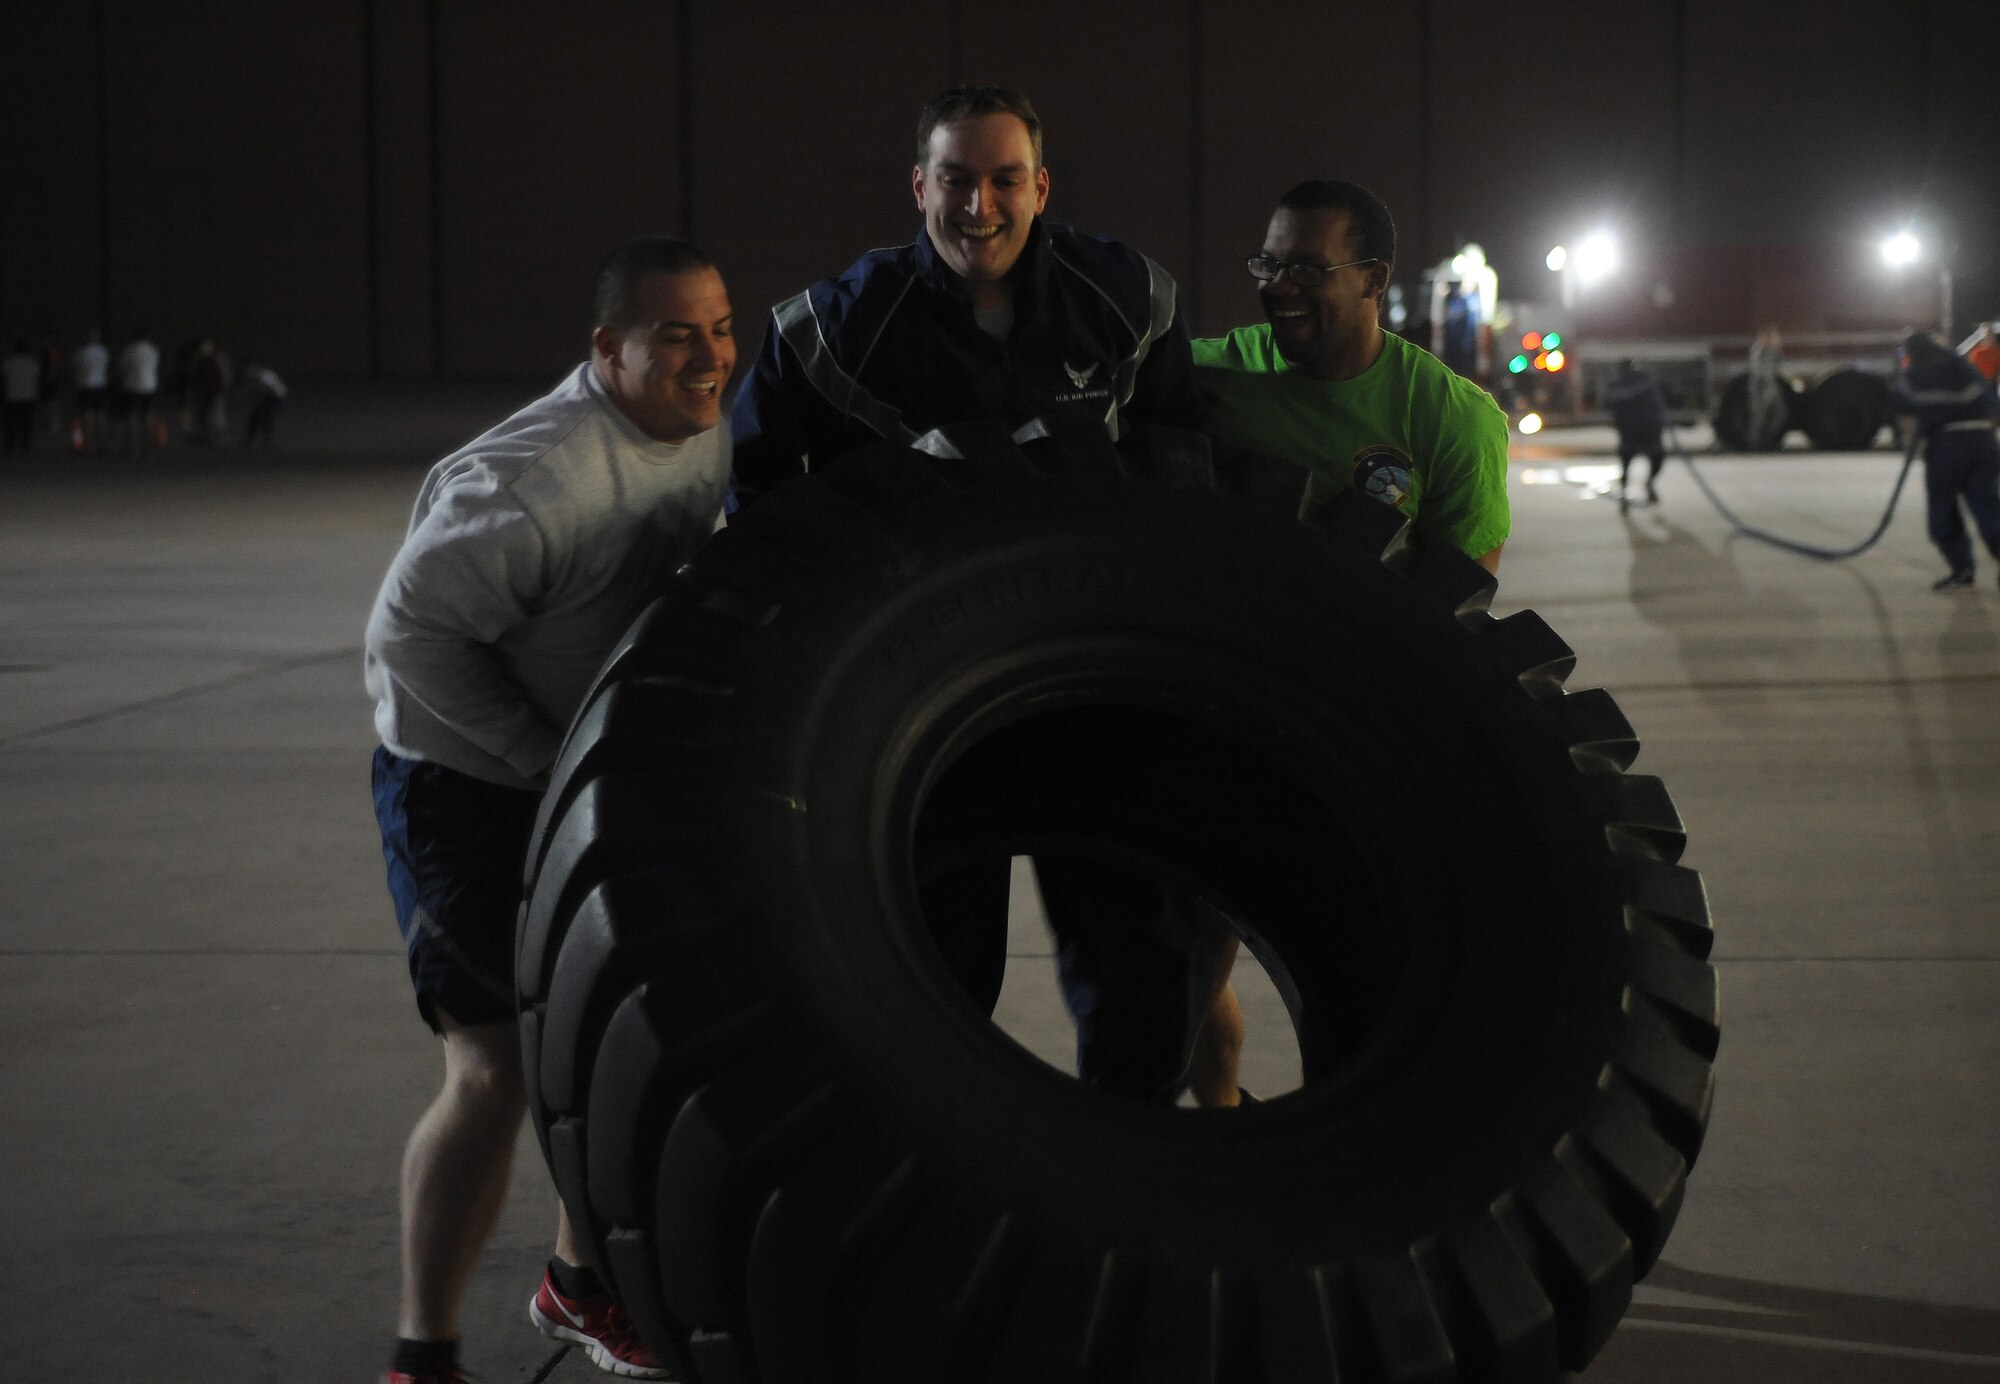 Airmen assigned to the 7th Civil Engineer Squadron and the 7th Communications Squadron take part in tire flipping during the Ray Rangel Remembrance Muster, Feb. 13, 2017, at Dyess Air Force Base, Texas. Dyess Airmen participated in a firefighter-geared workout to challenge the physical strength and endurance that is used during an emergency. (U.S. Air Force photo by Airman 1st Class Emily Copeland)